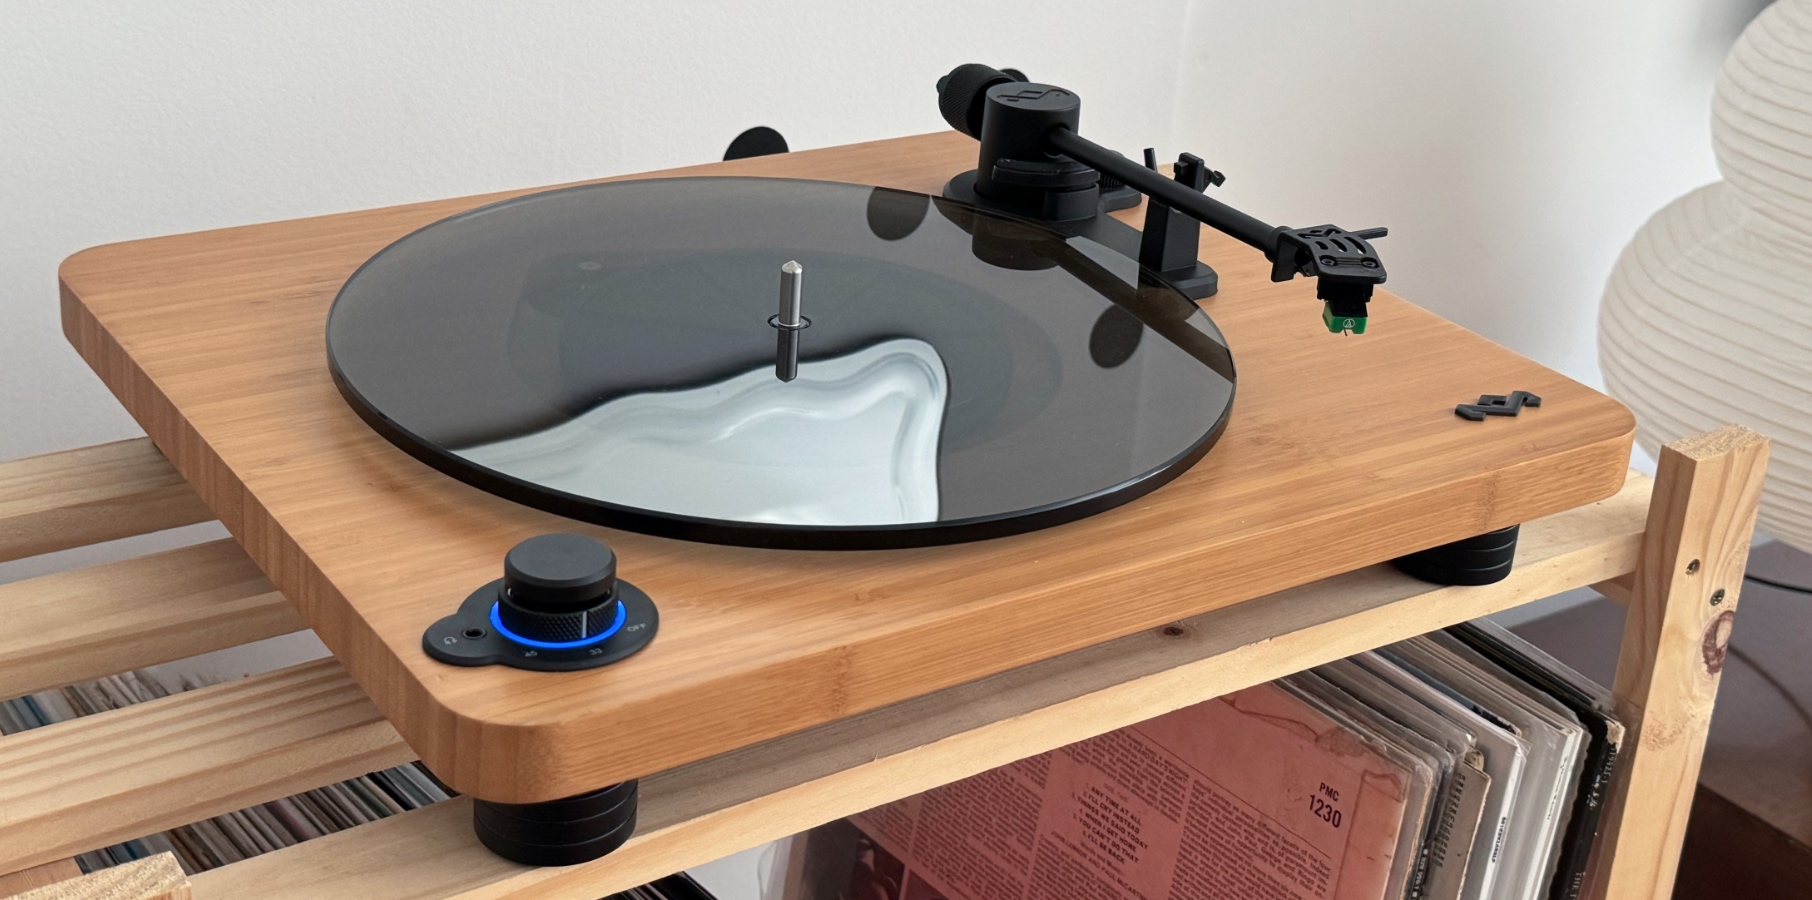 House of Marley Stir It Up Lux Wireless Turntable: Vinyl Record Player with  Wireless Bluetooth Connectivity, Built-in Pre-Amp, and Sustainable